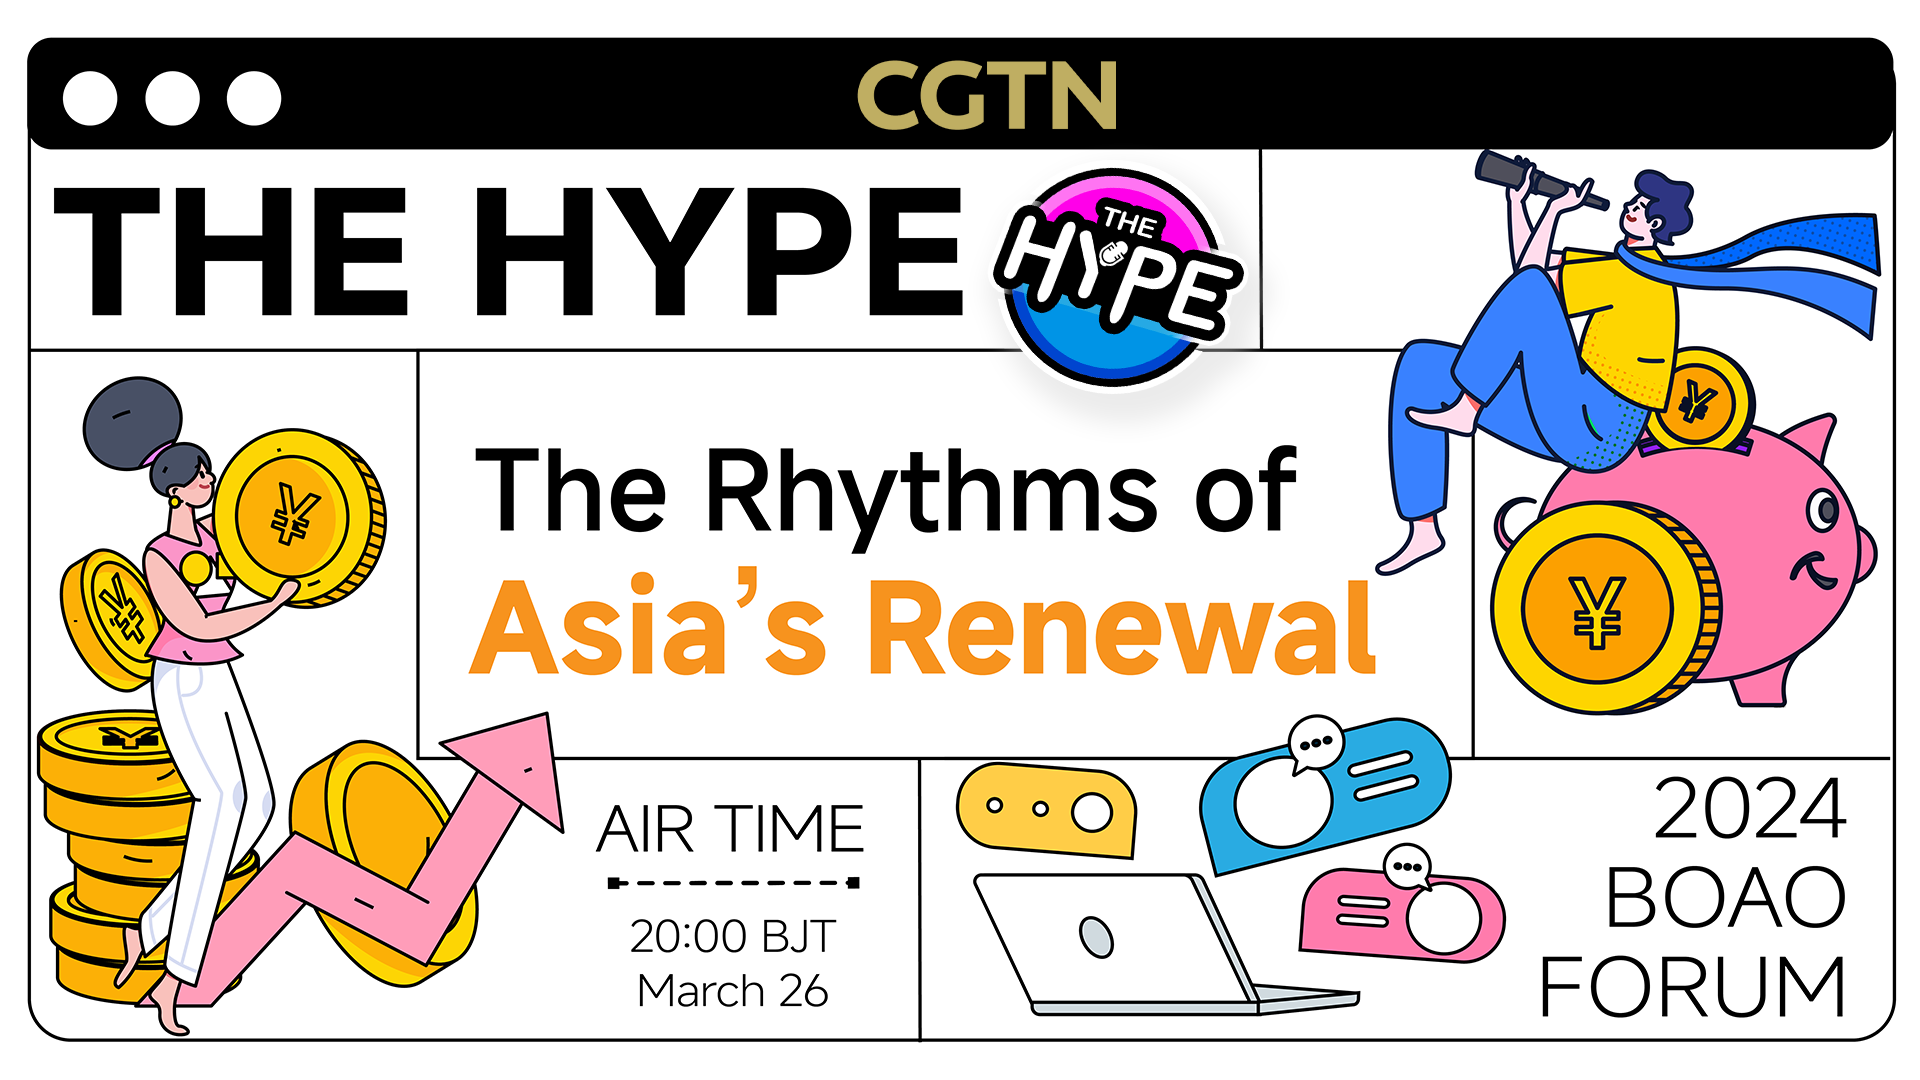 Live: THE HYPE – The rhythms of Asia's renewal